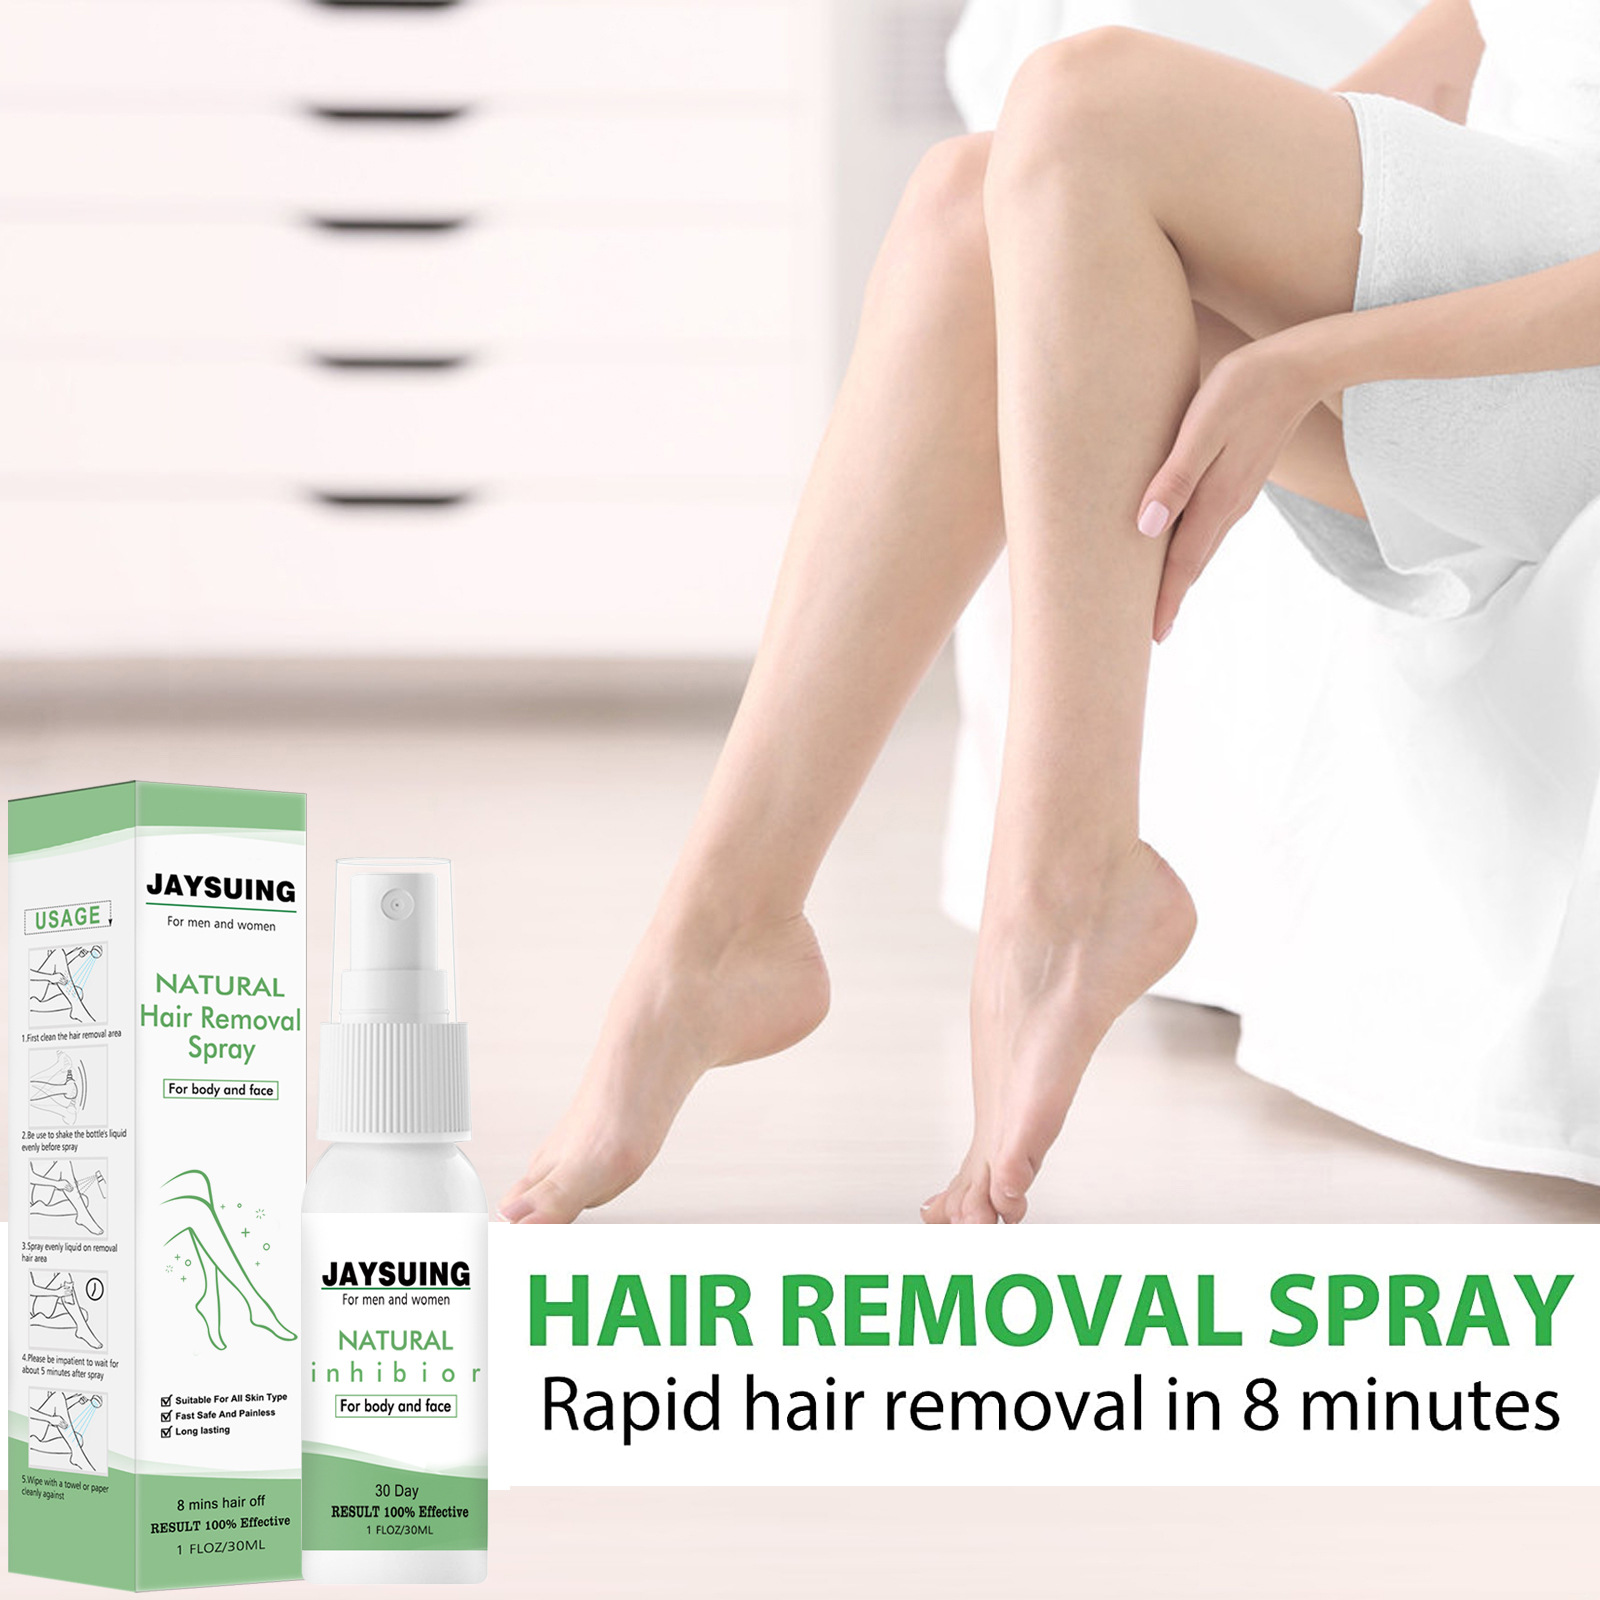 Jaysuing Hair Removal Spray Mousse Foam Gentle Hair Removal Hair Removal Spray Does Not Irritate The Whole Body